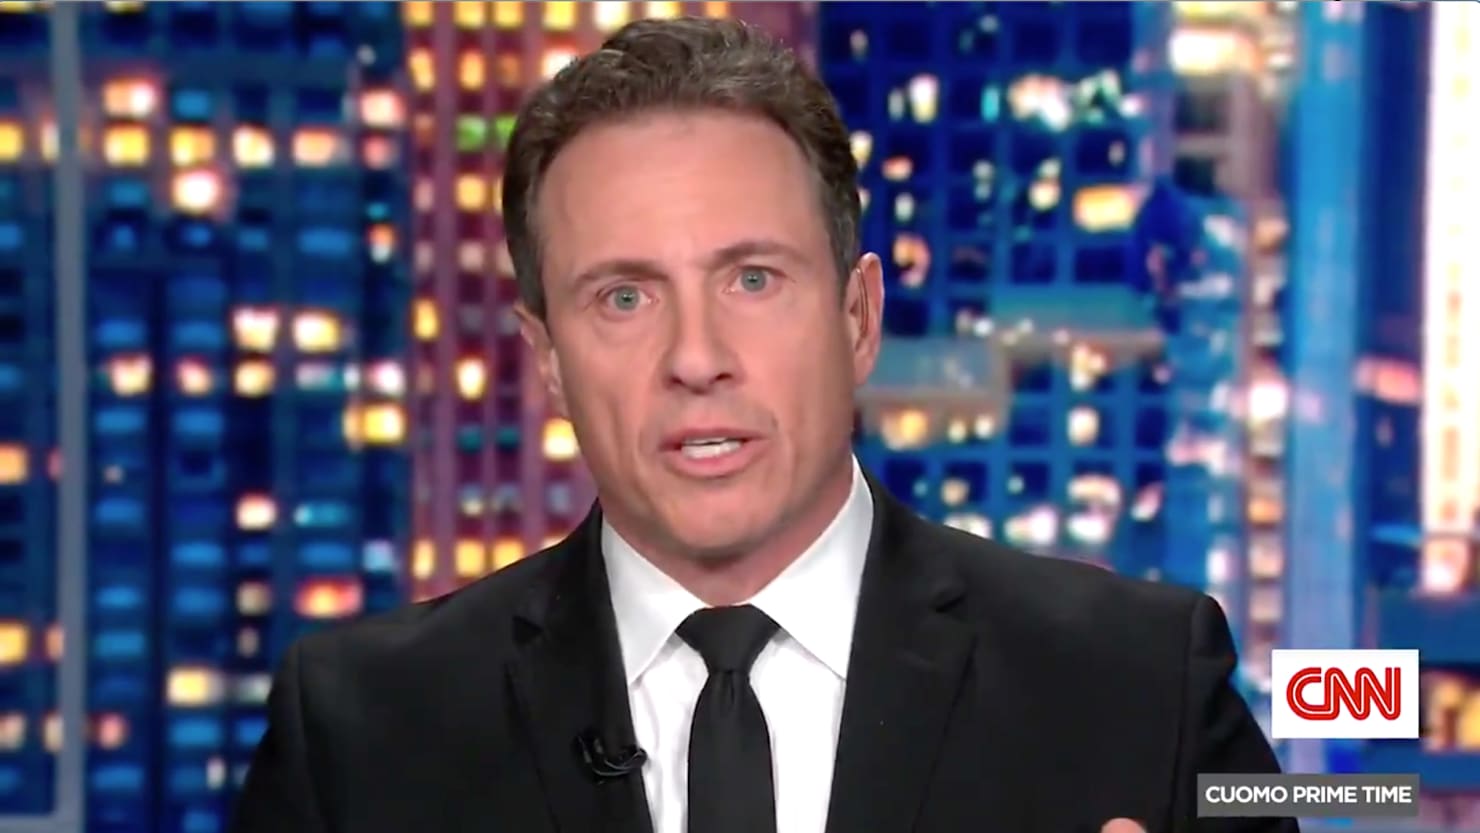 CNN’s Chris Cuomo admits uncomfortable allegations against brother Andrew Cuomo